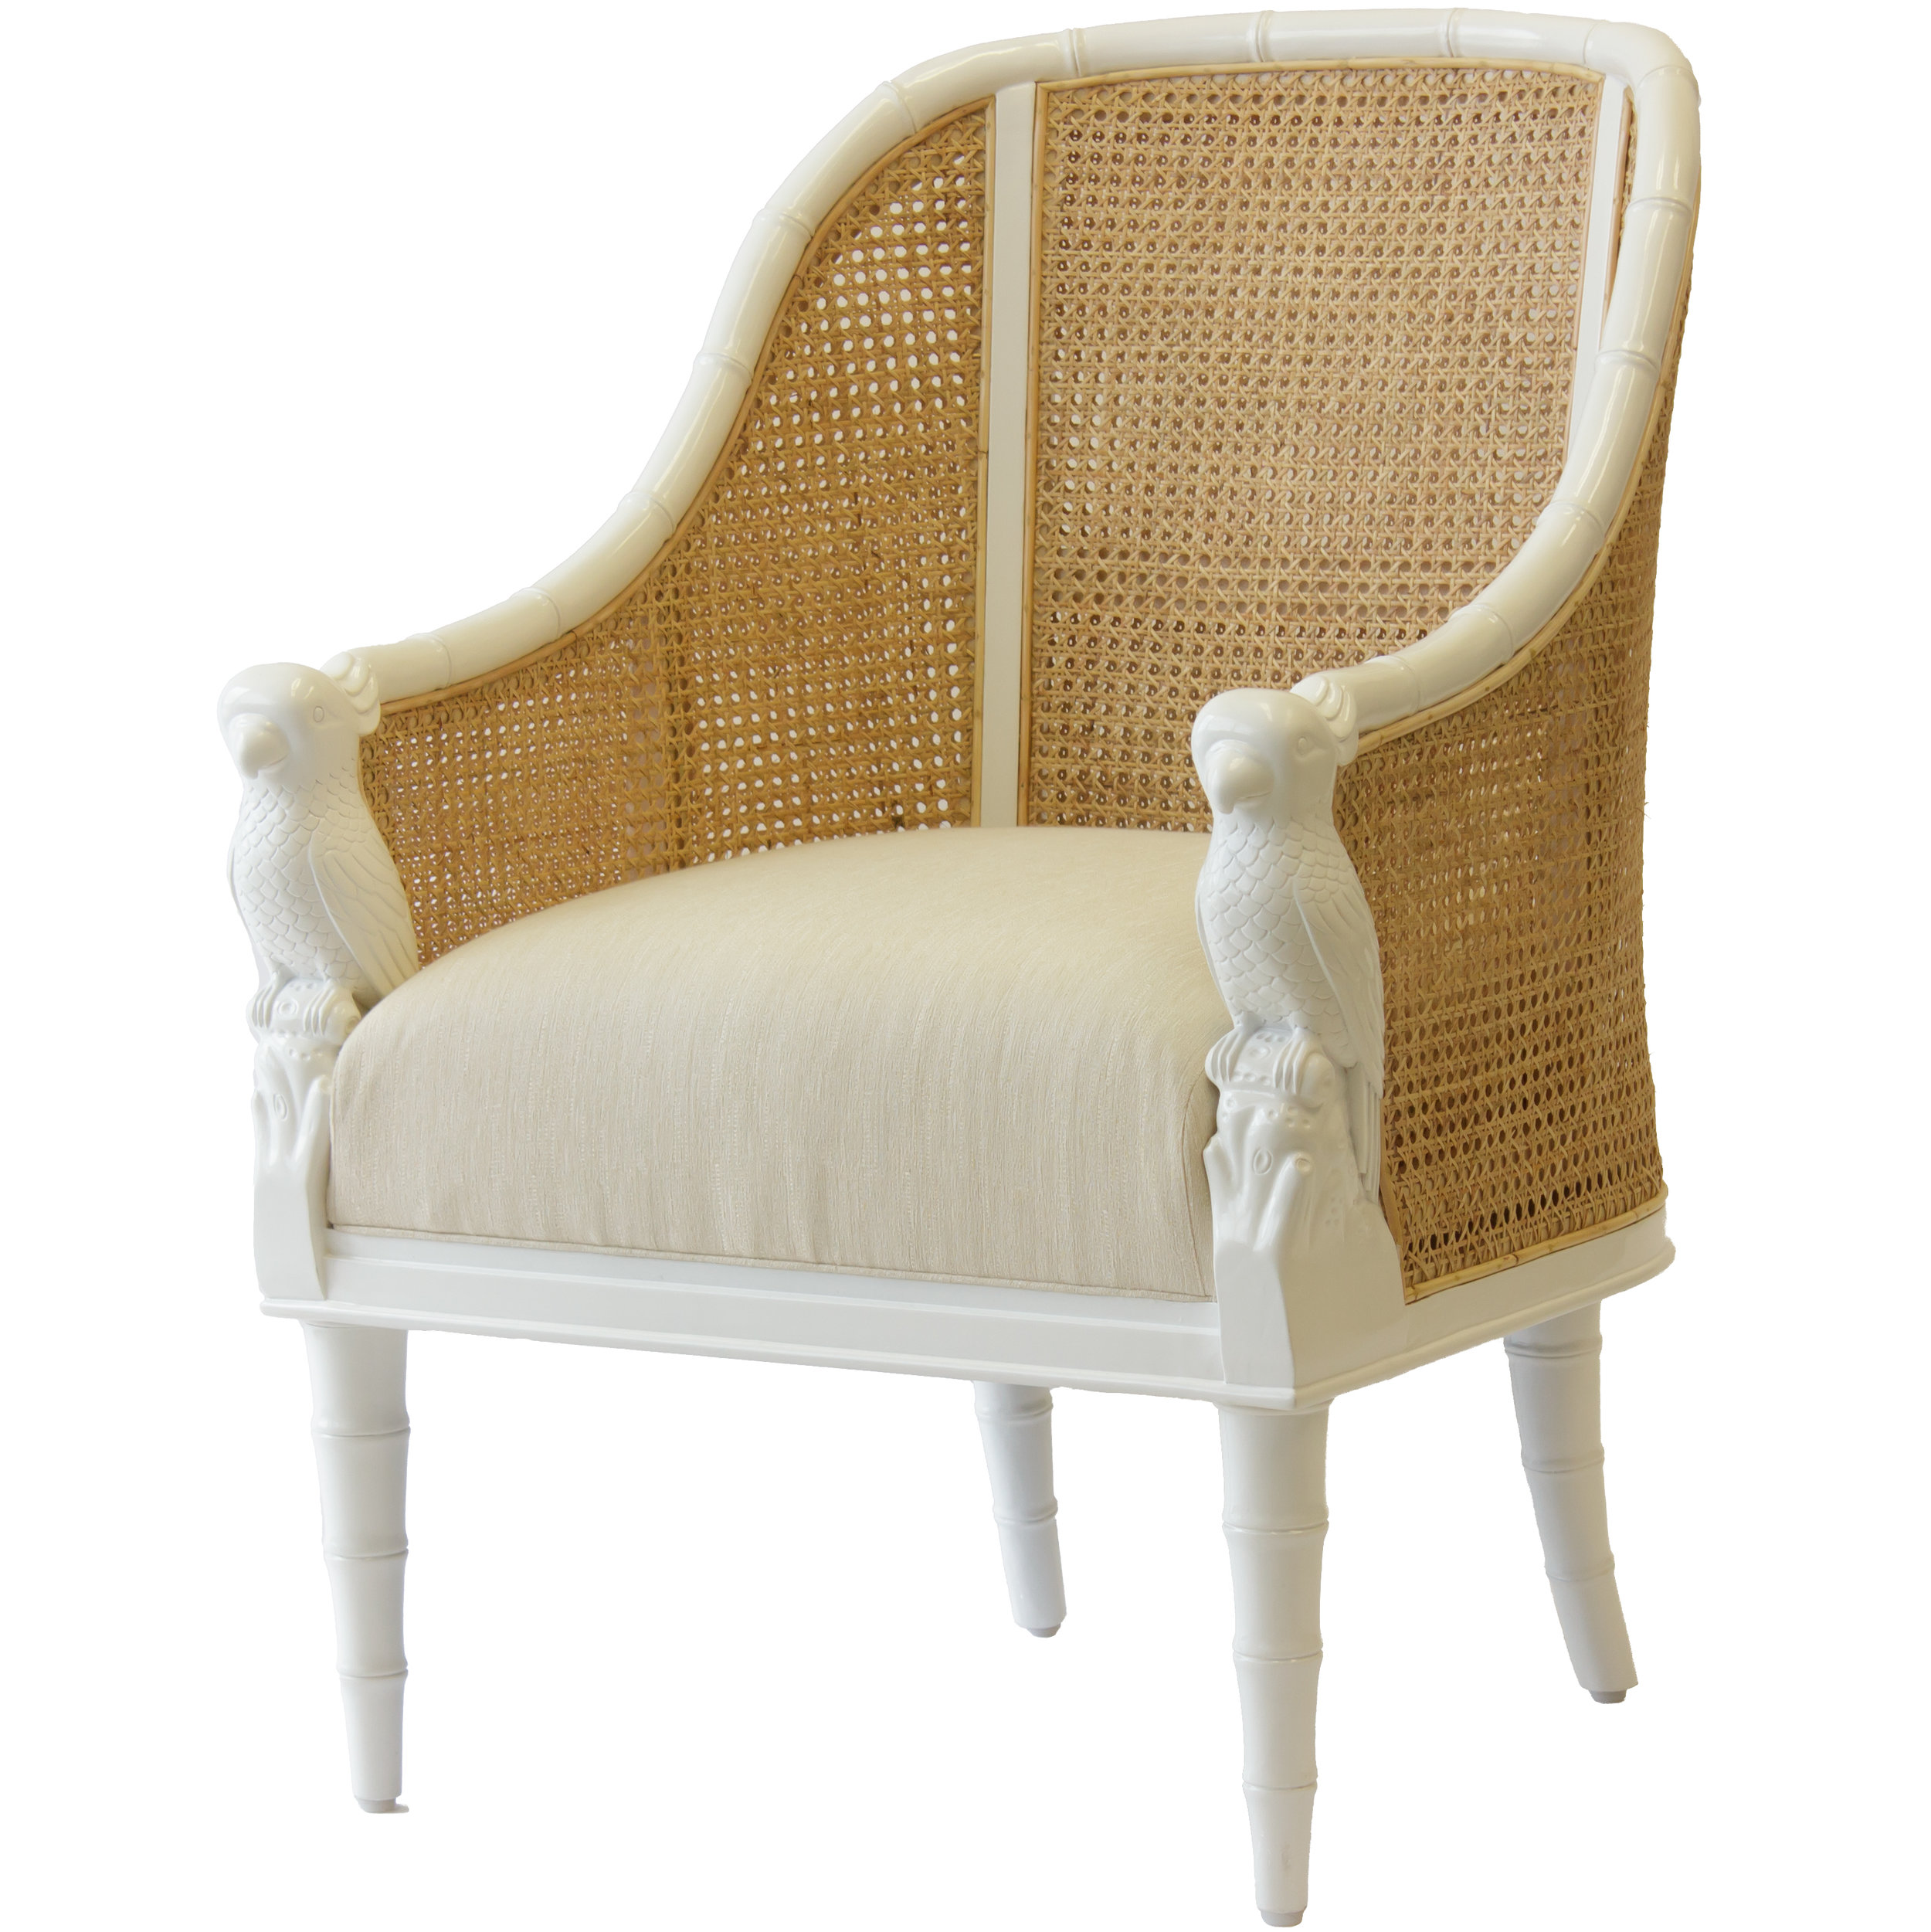  Florence Broadhurst’s Cockatoo Chair in white with natural caning  Photo Source: Selamat Designs 